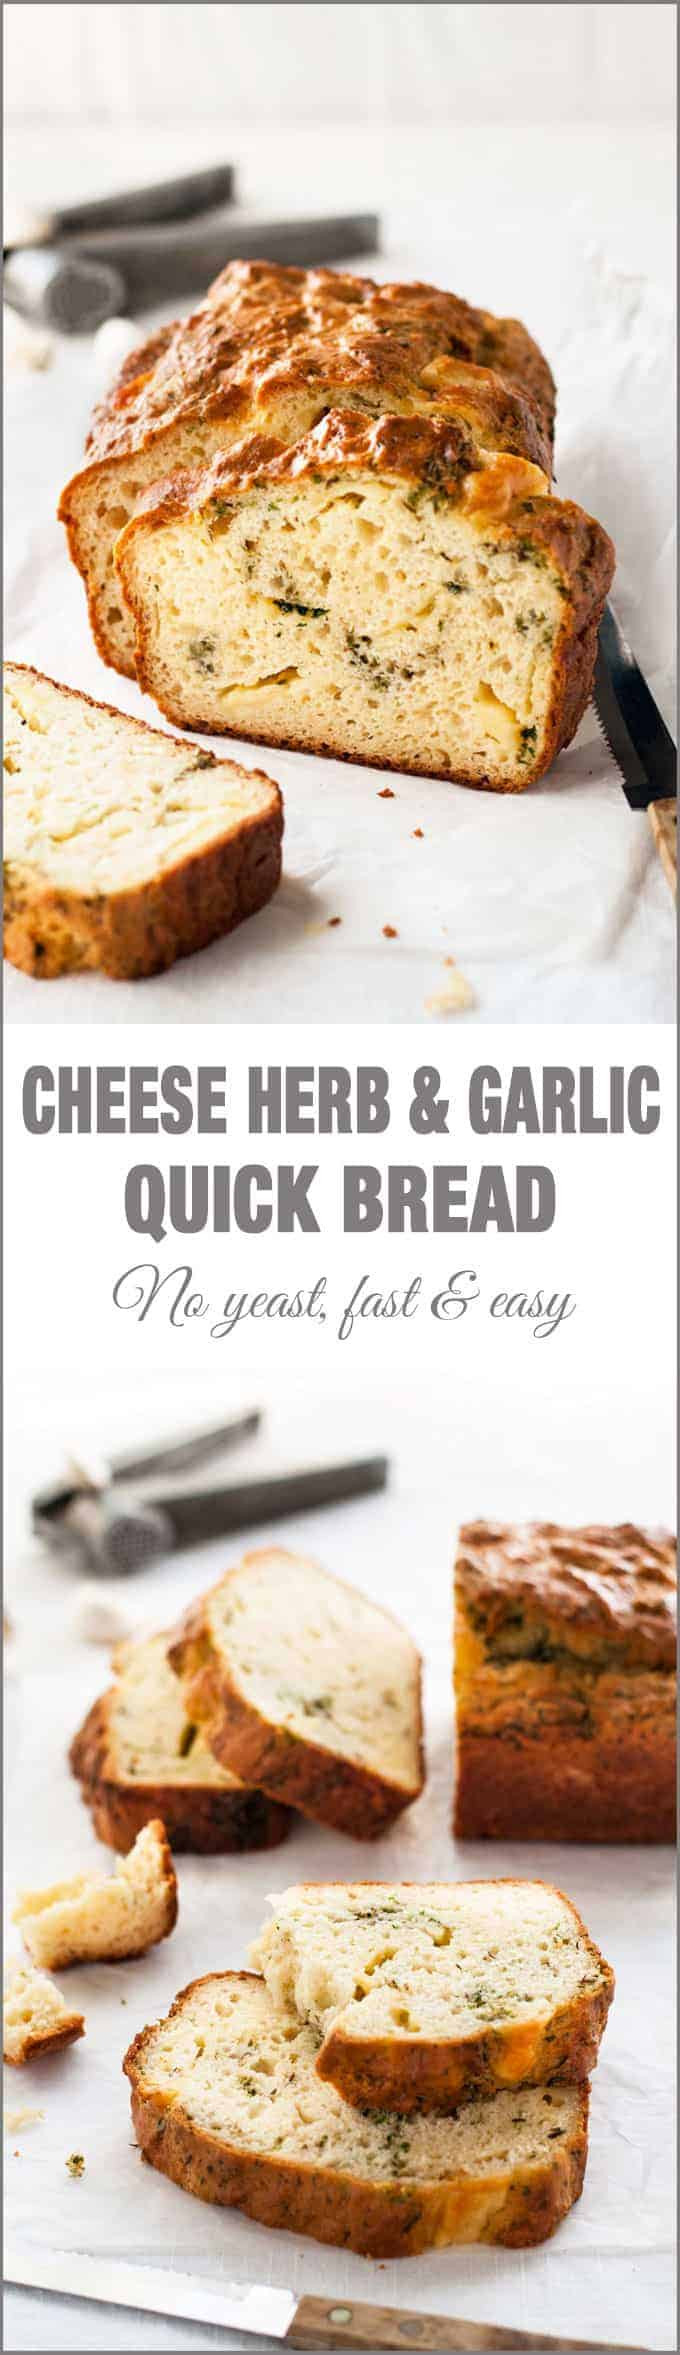 Quick Yeast Bread Recipes
 Cheese Herb & Garlic Quick Bread No Yeast